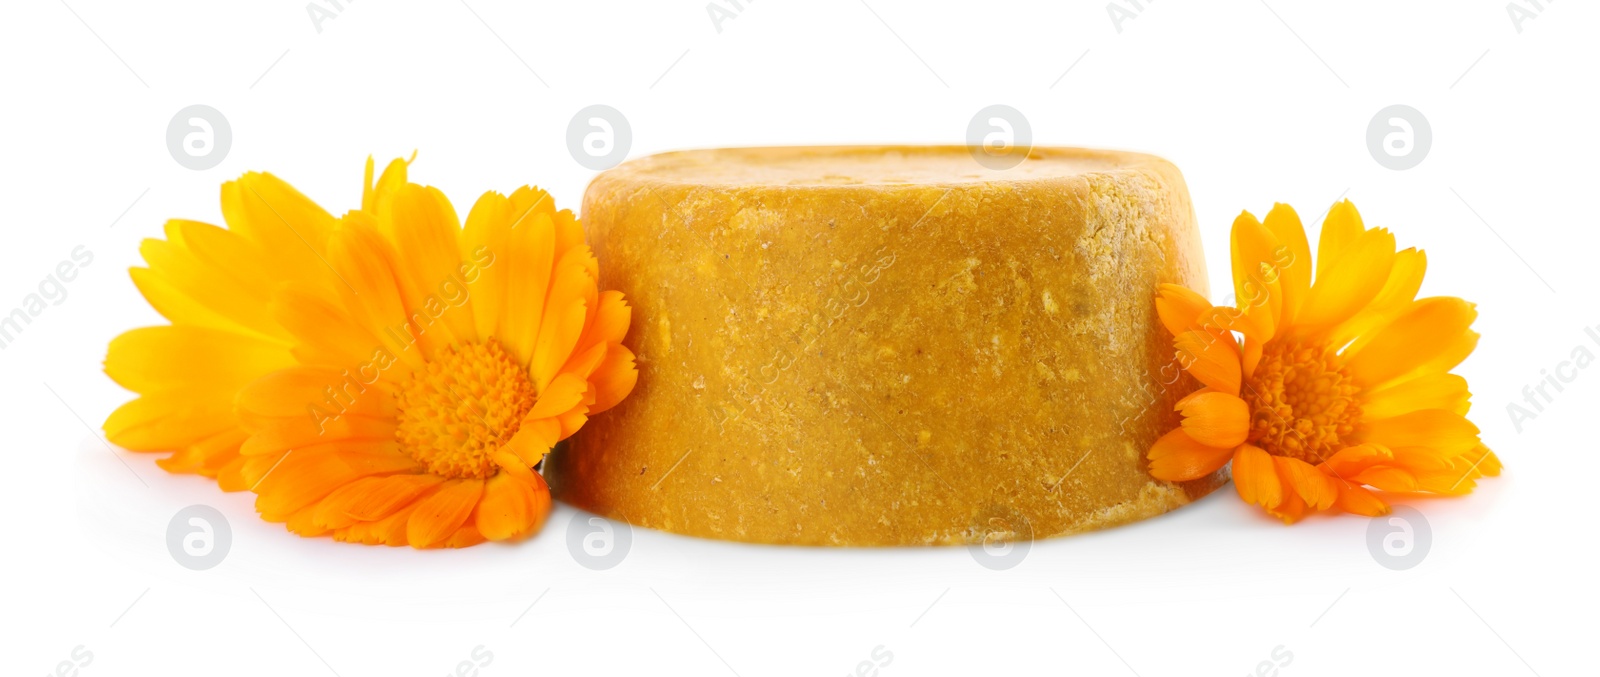 Photo of Yellow solid shampoo bar and flowers on white background. Hair care